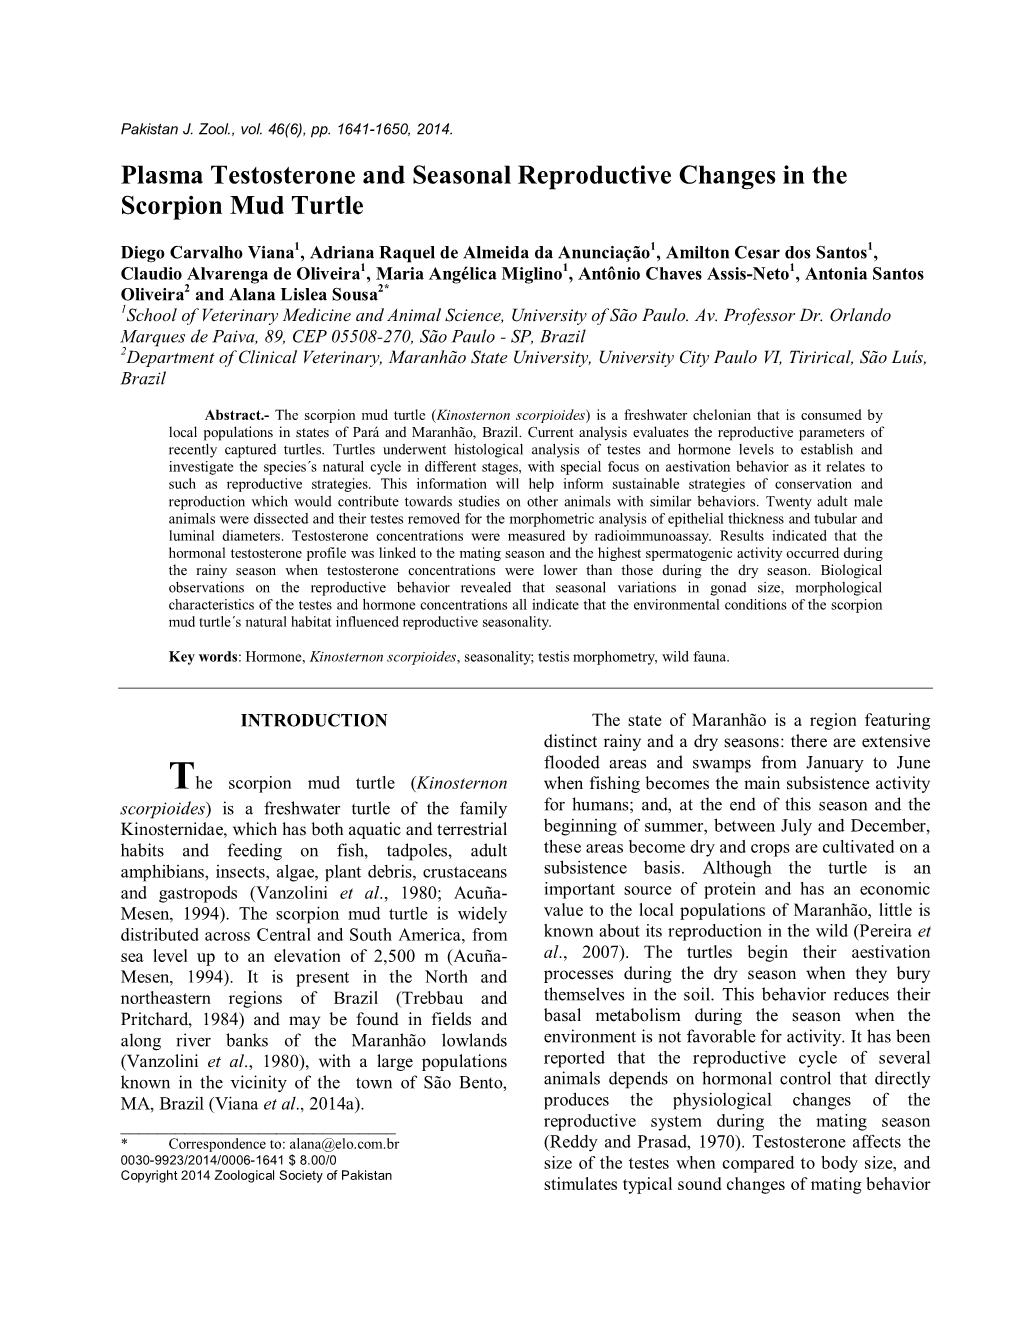 Plasma Testosterone and Seasonal Reproductive Changes in the Scorpion Mud Turtle